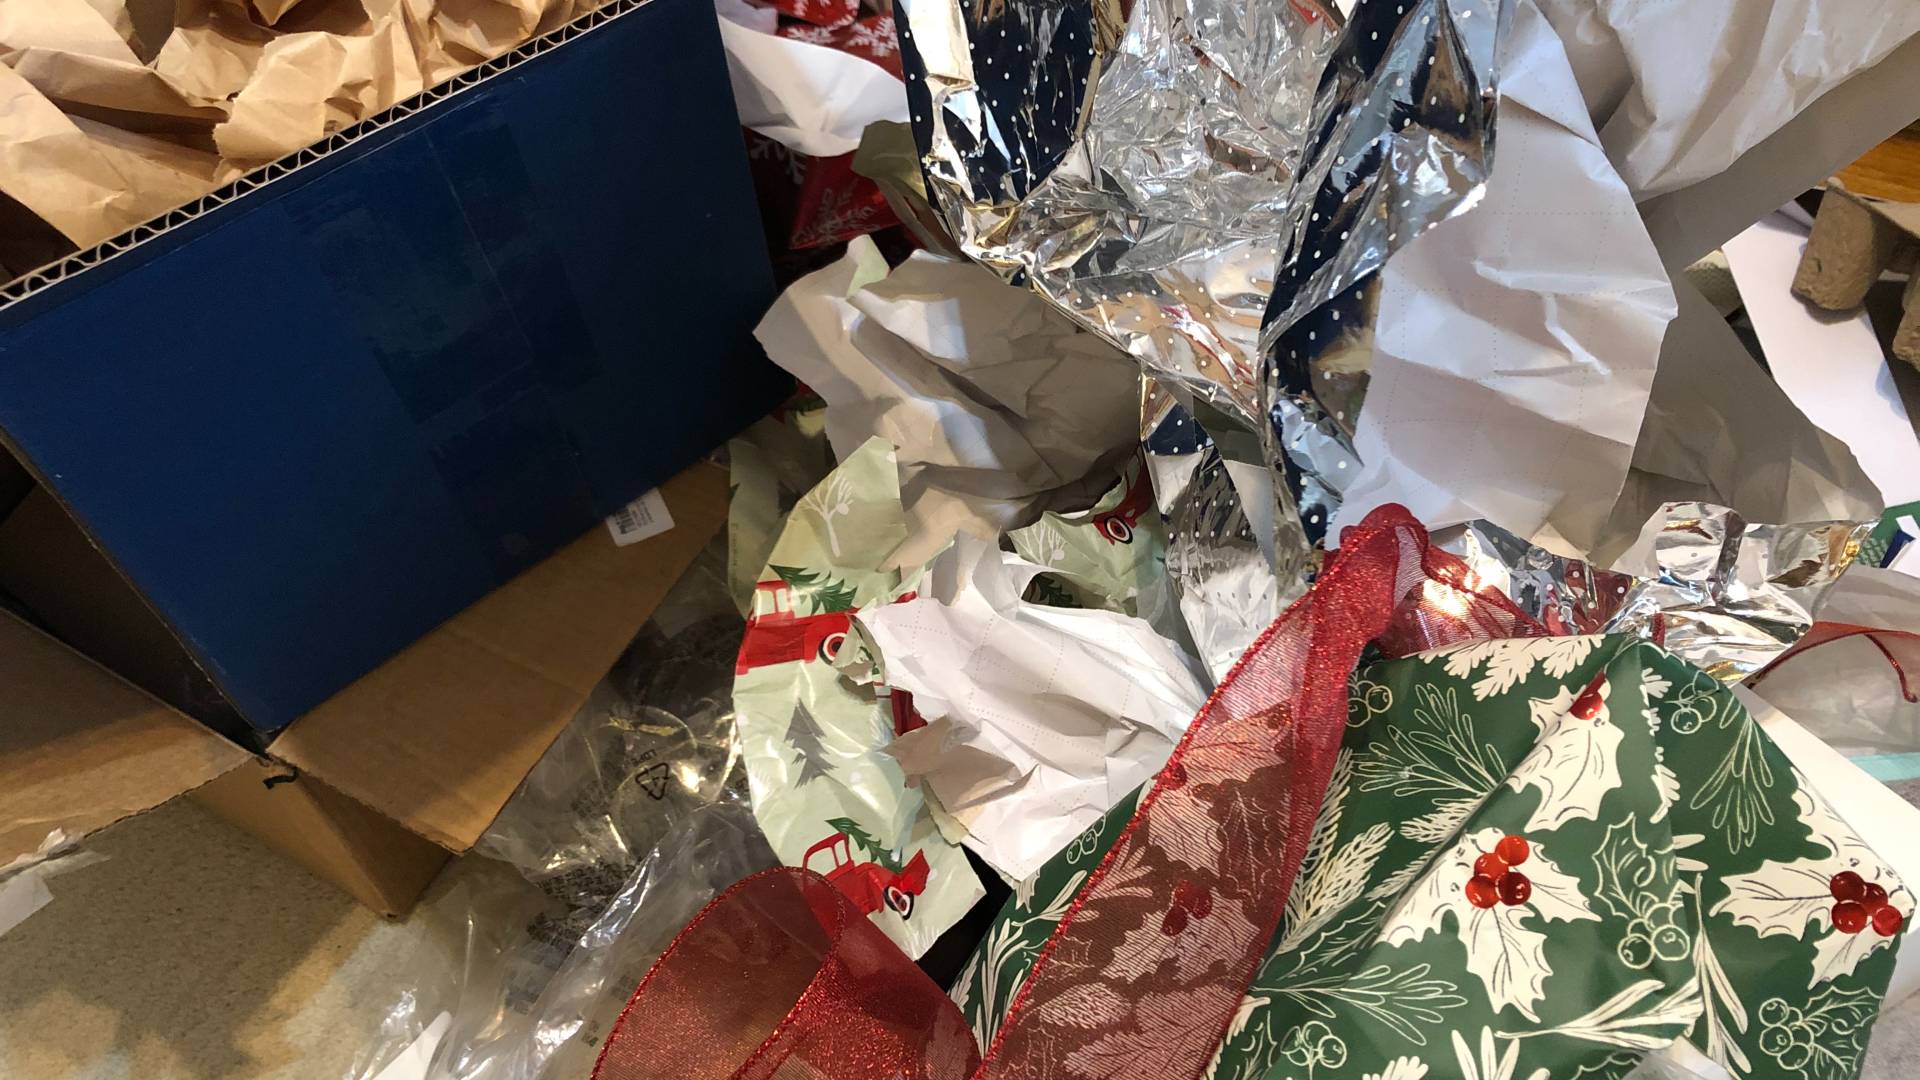 In Boston, last week's wrapping paper cannot be recycled